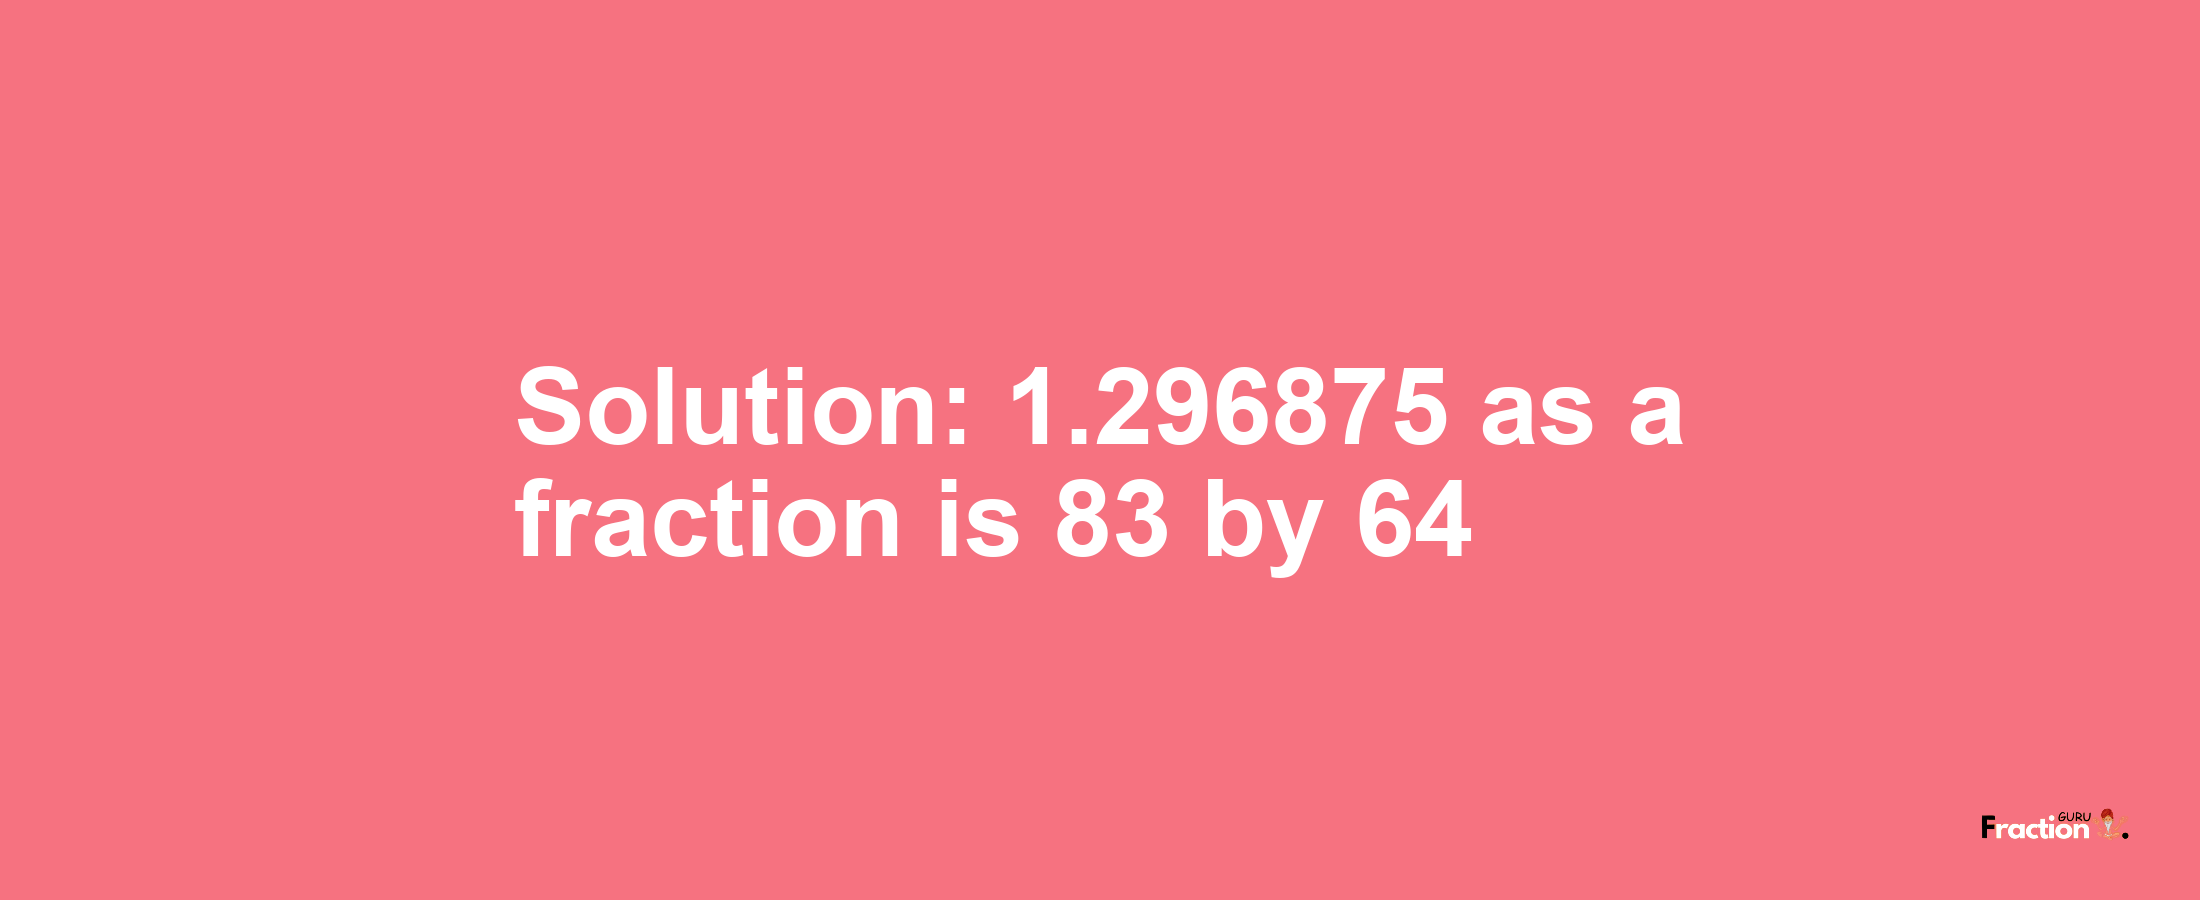 Solution:1.296875 as a fraction is 83/64